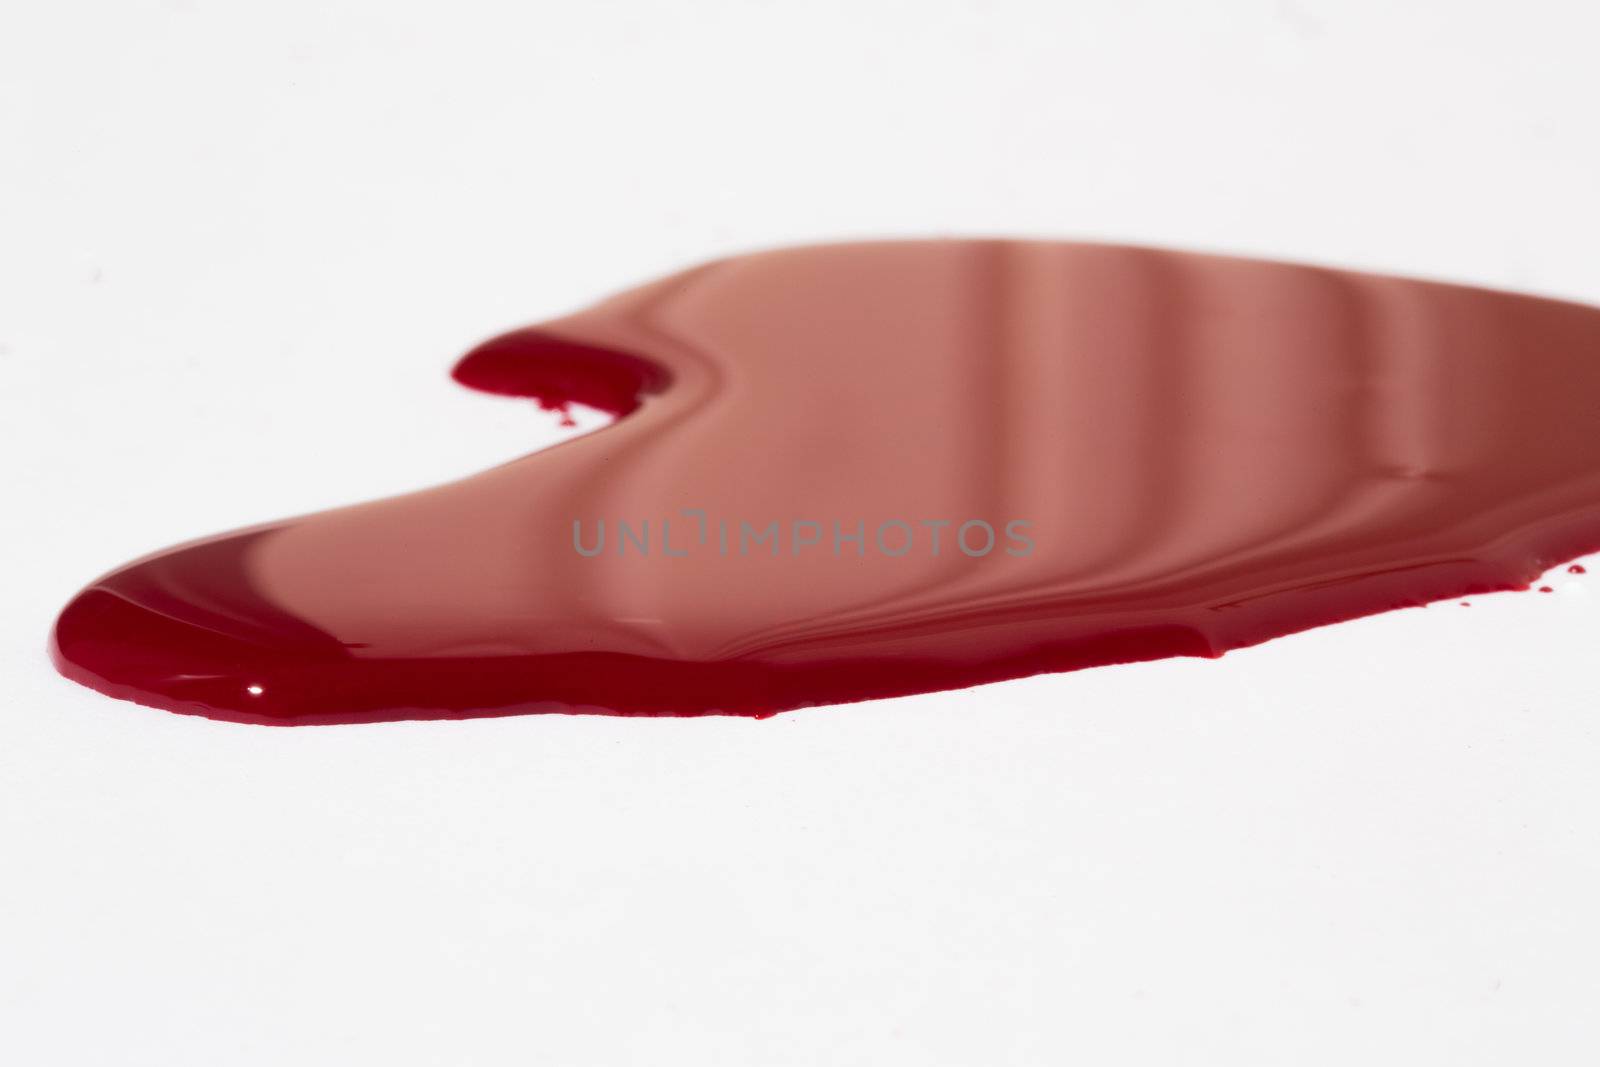 A high resolution image of a blood puddle